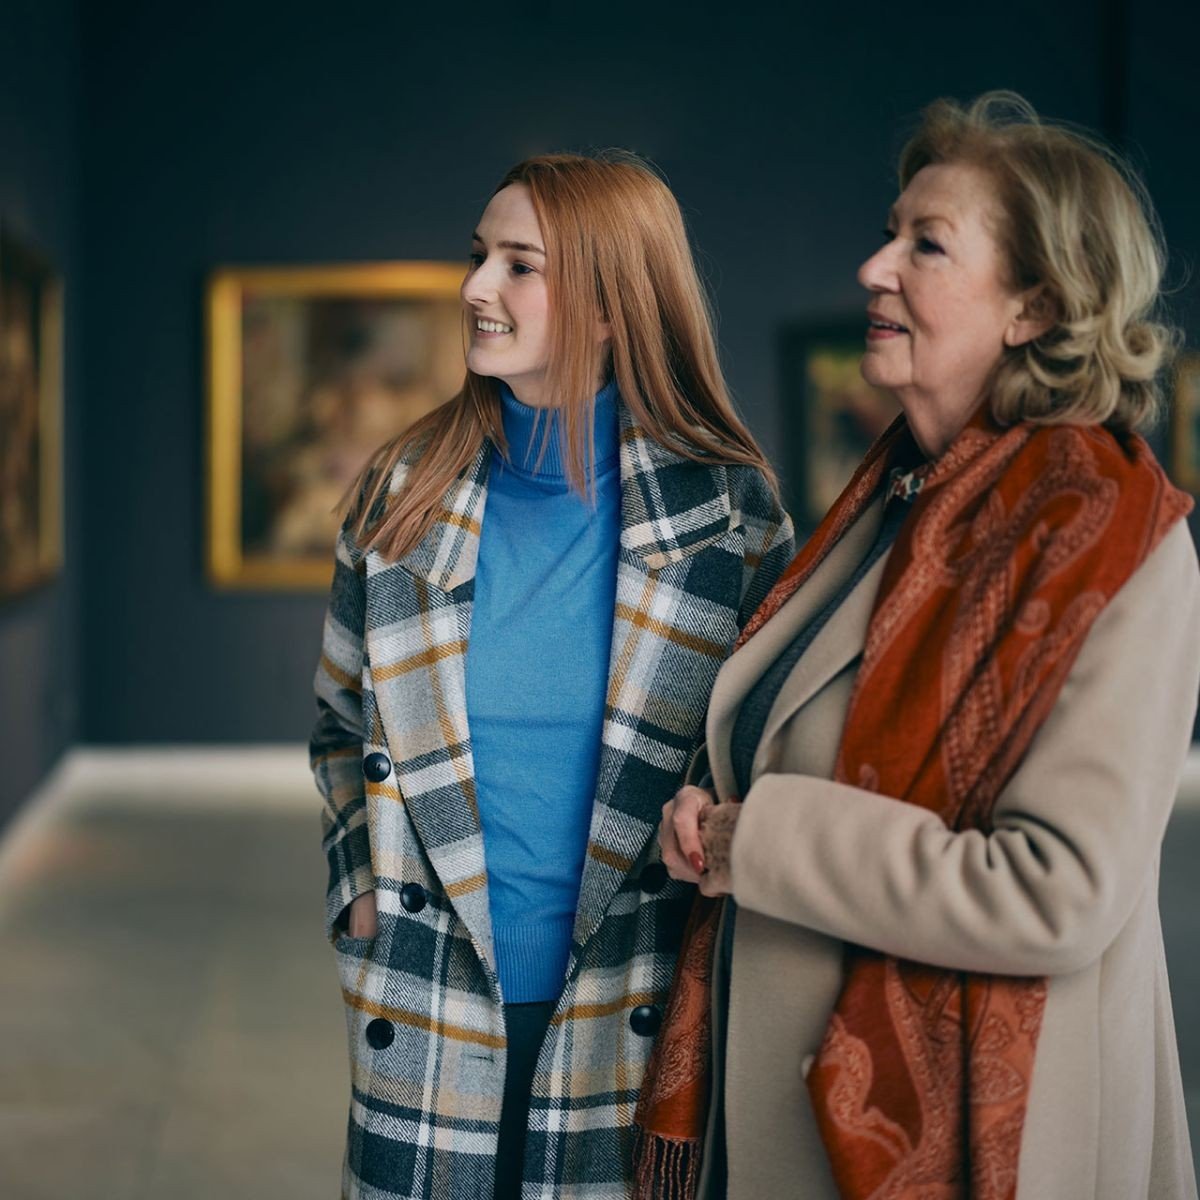 Mother and daughter looking at paintings